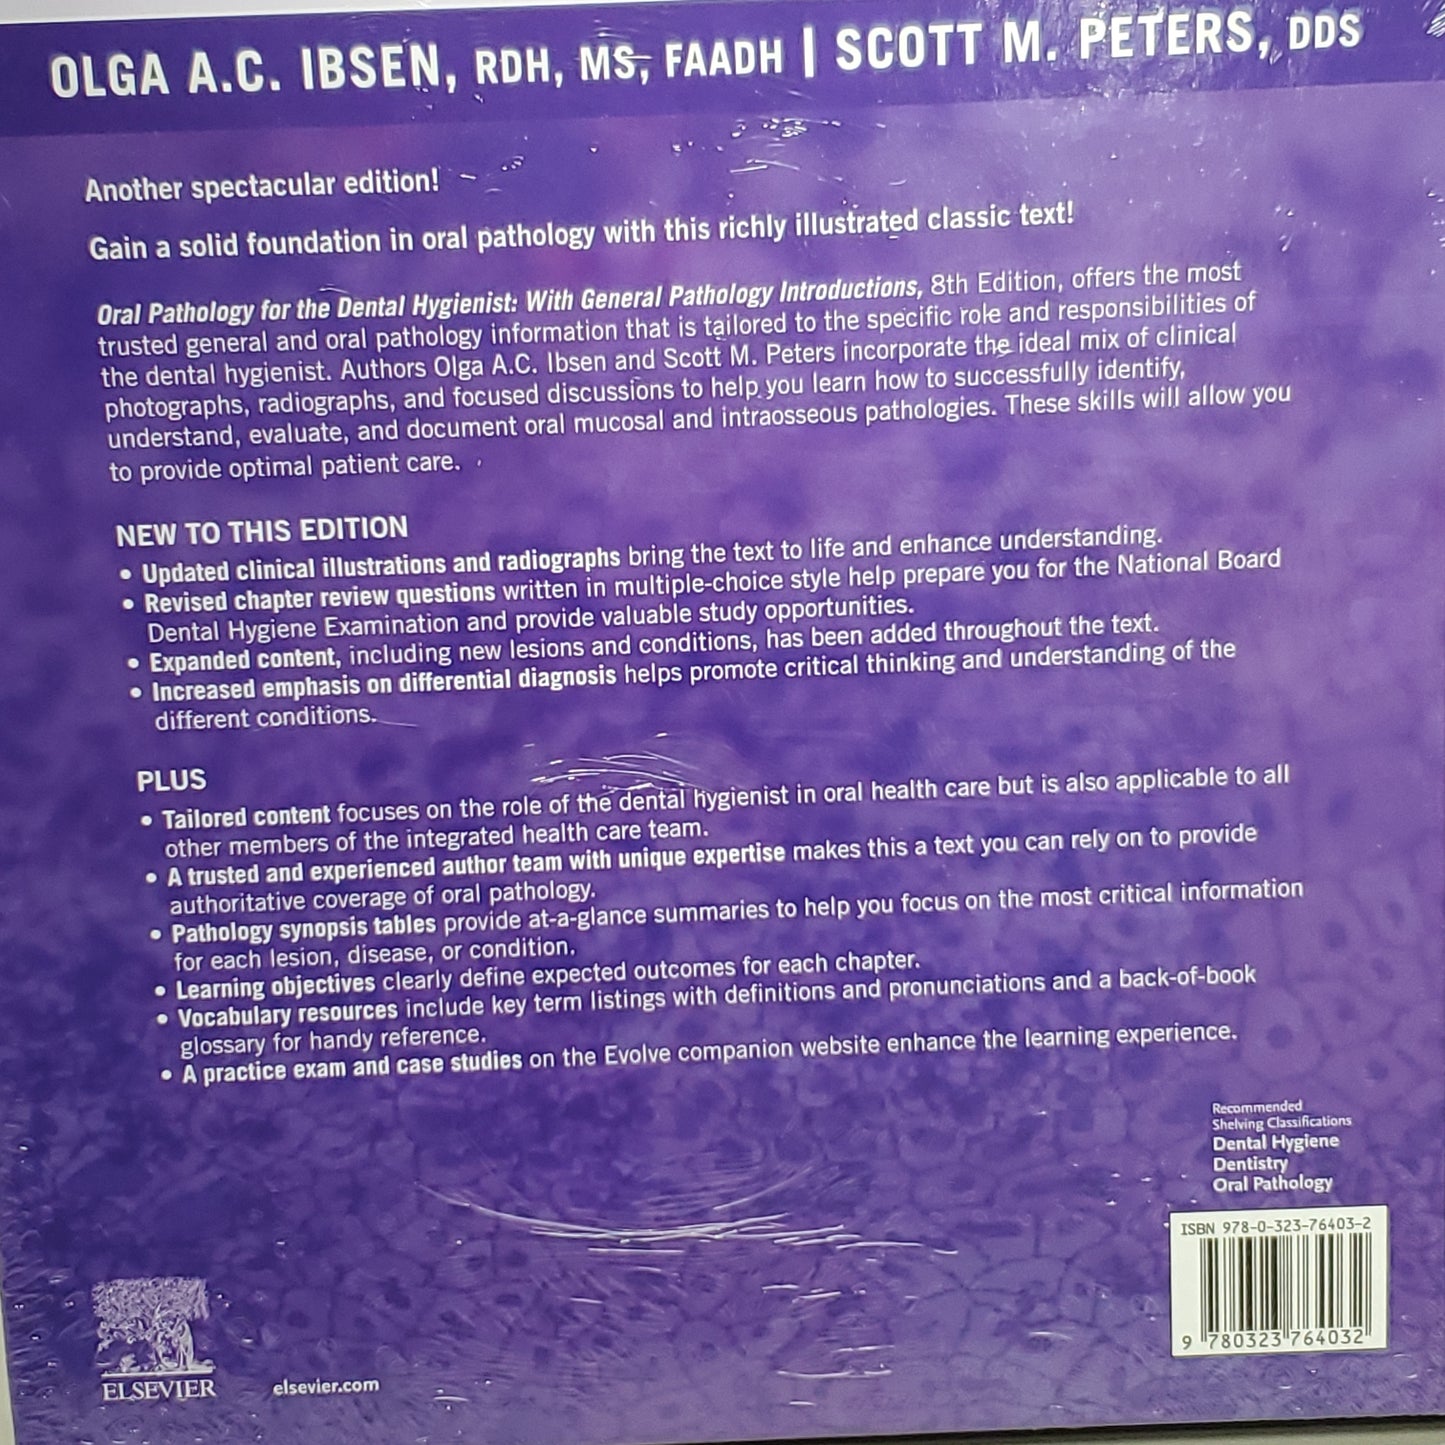 ELSEVIER Oral Pathology for the Dental Hygienist 8th Edition Olga Ibsen & Scott Peters (New)